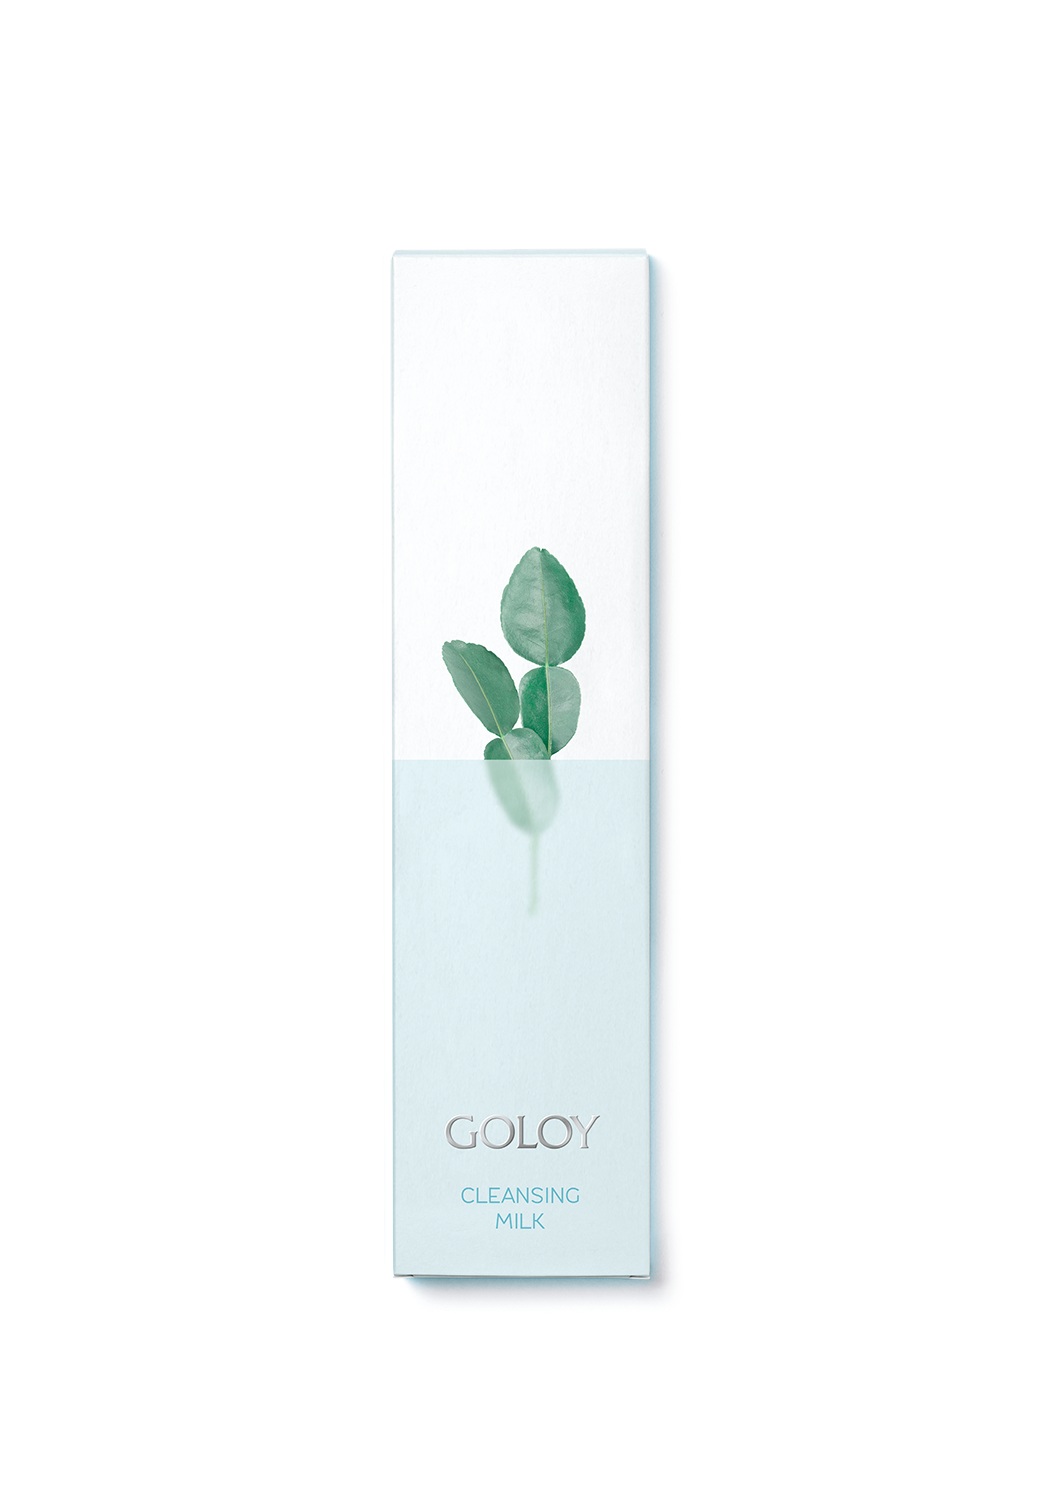 GOLOY Cleansing Milk